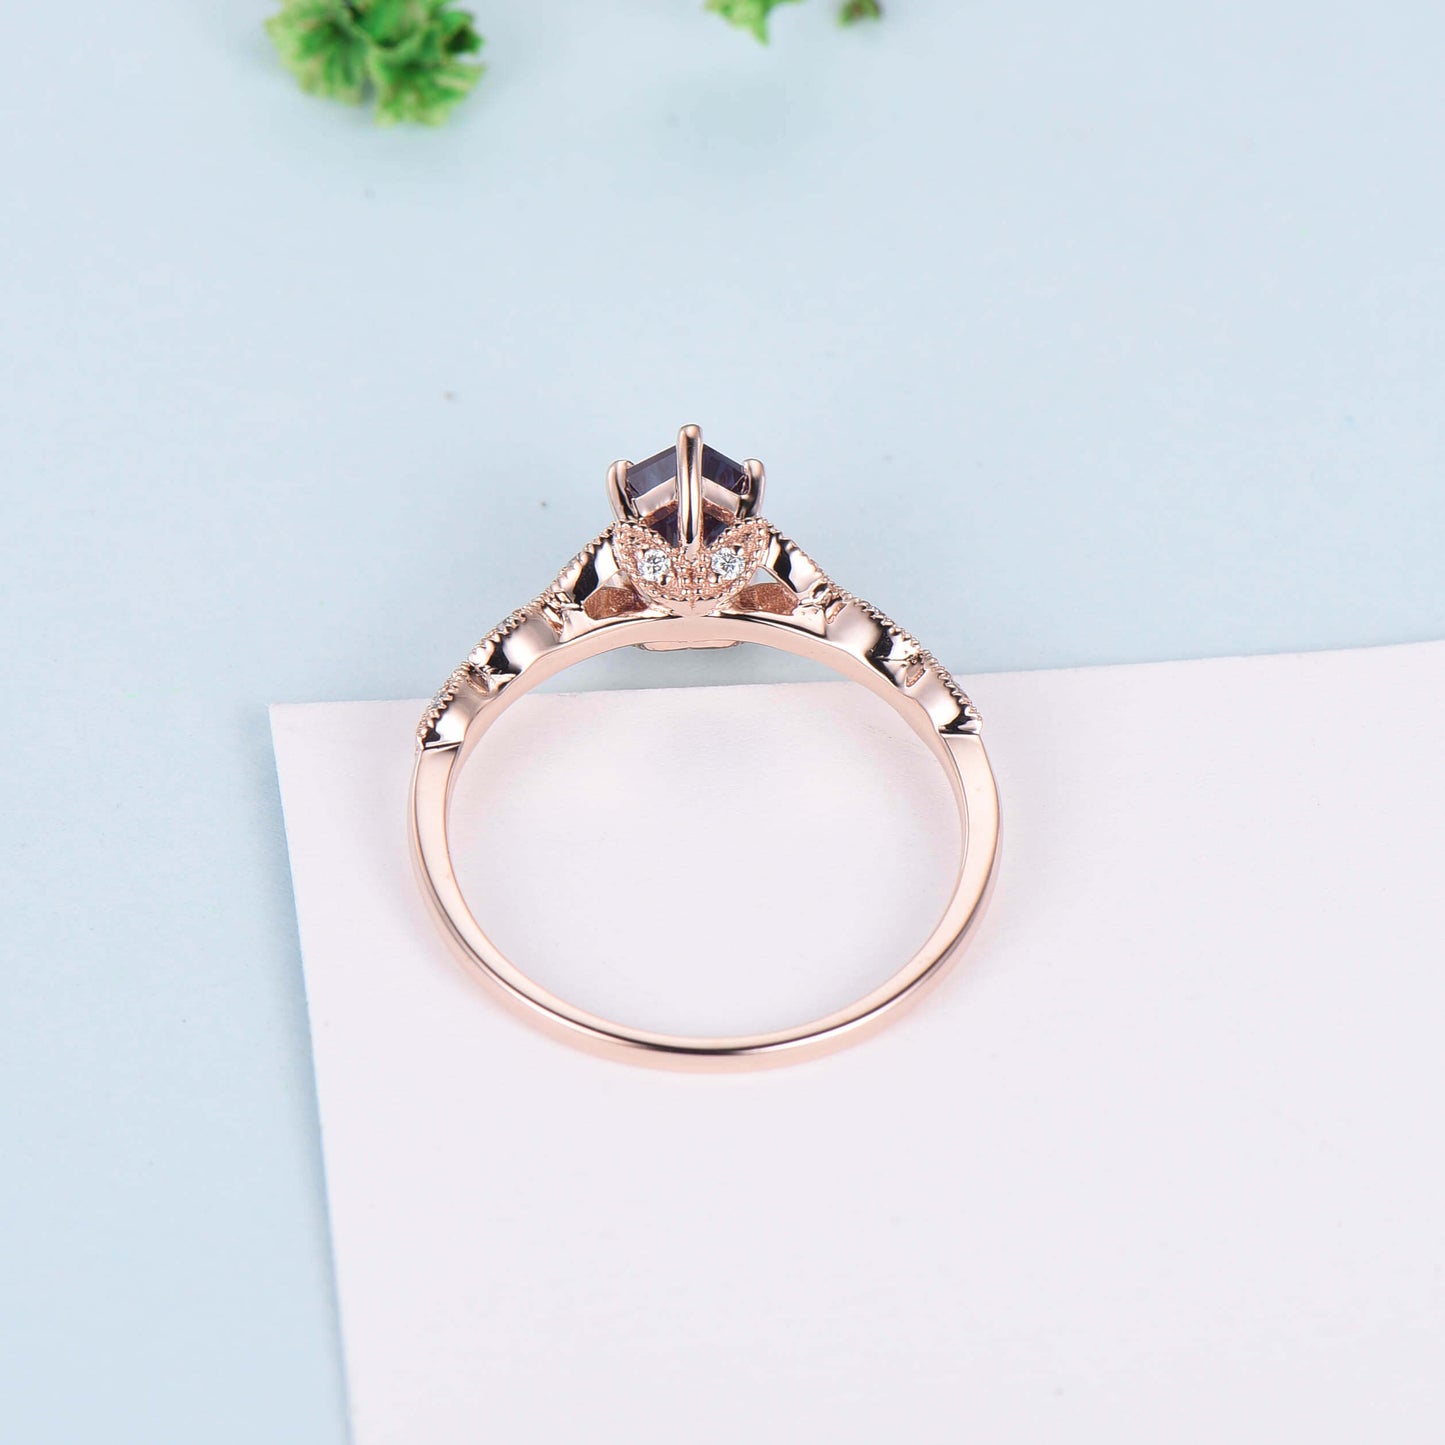 Elongated Color Change Alexandrite Ring Antique Solid White Gold Hexagon Alexandrite Engagement Ring Unique Leaf Wedding Ring Women - PENFINE